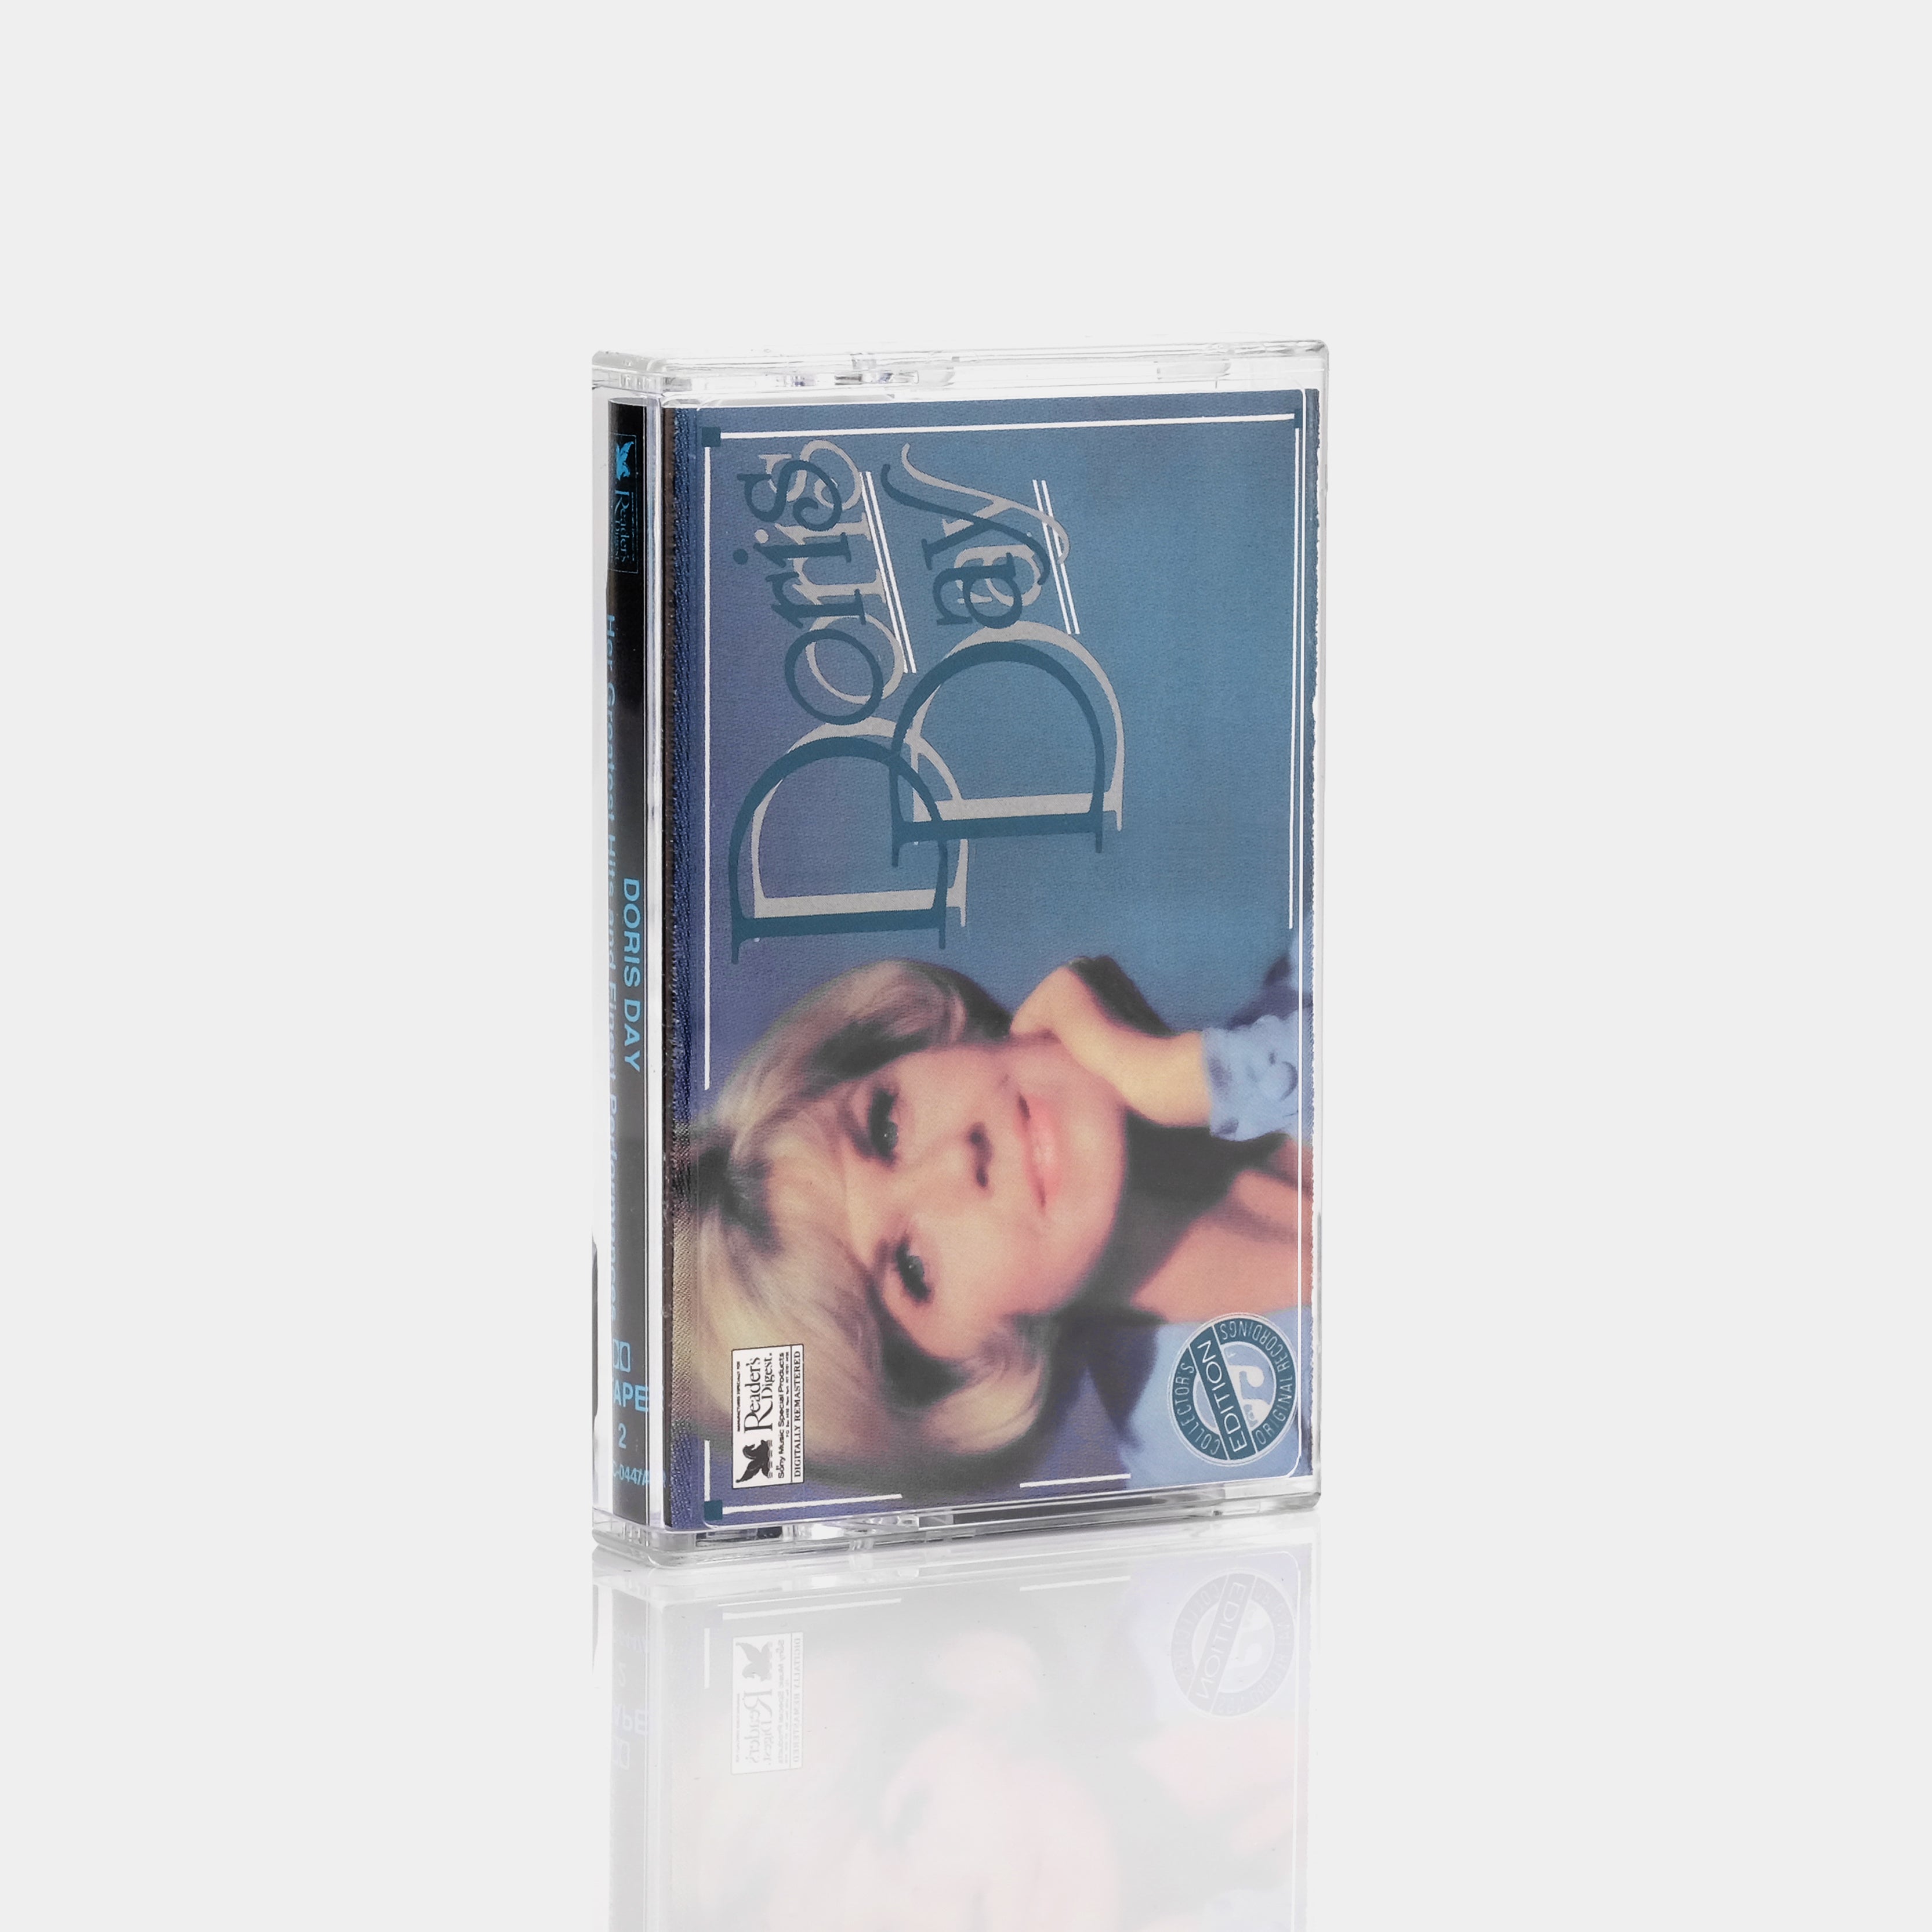 Doris Day - Her Greatest Hits and Finest Performances (Tape 2) Cassette Tape